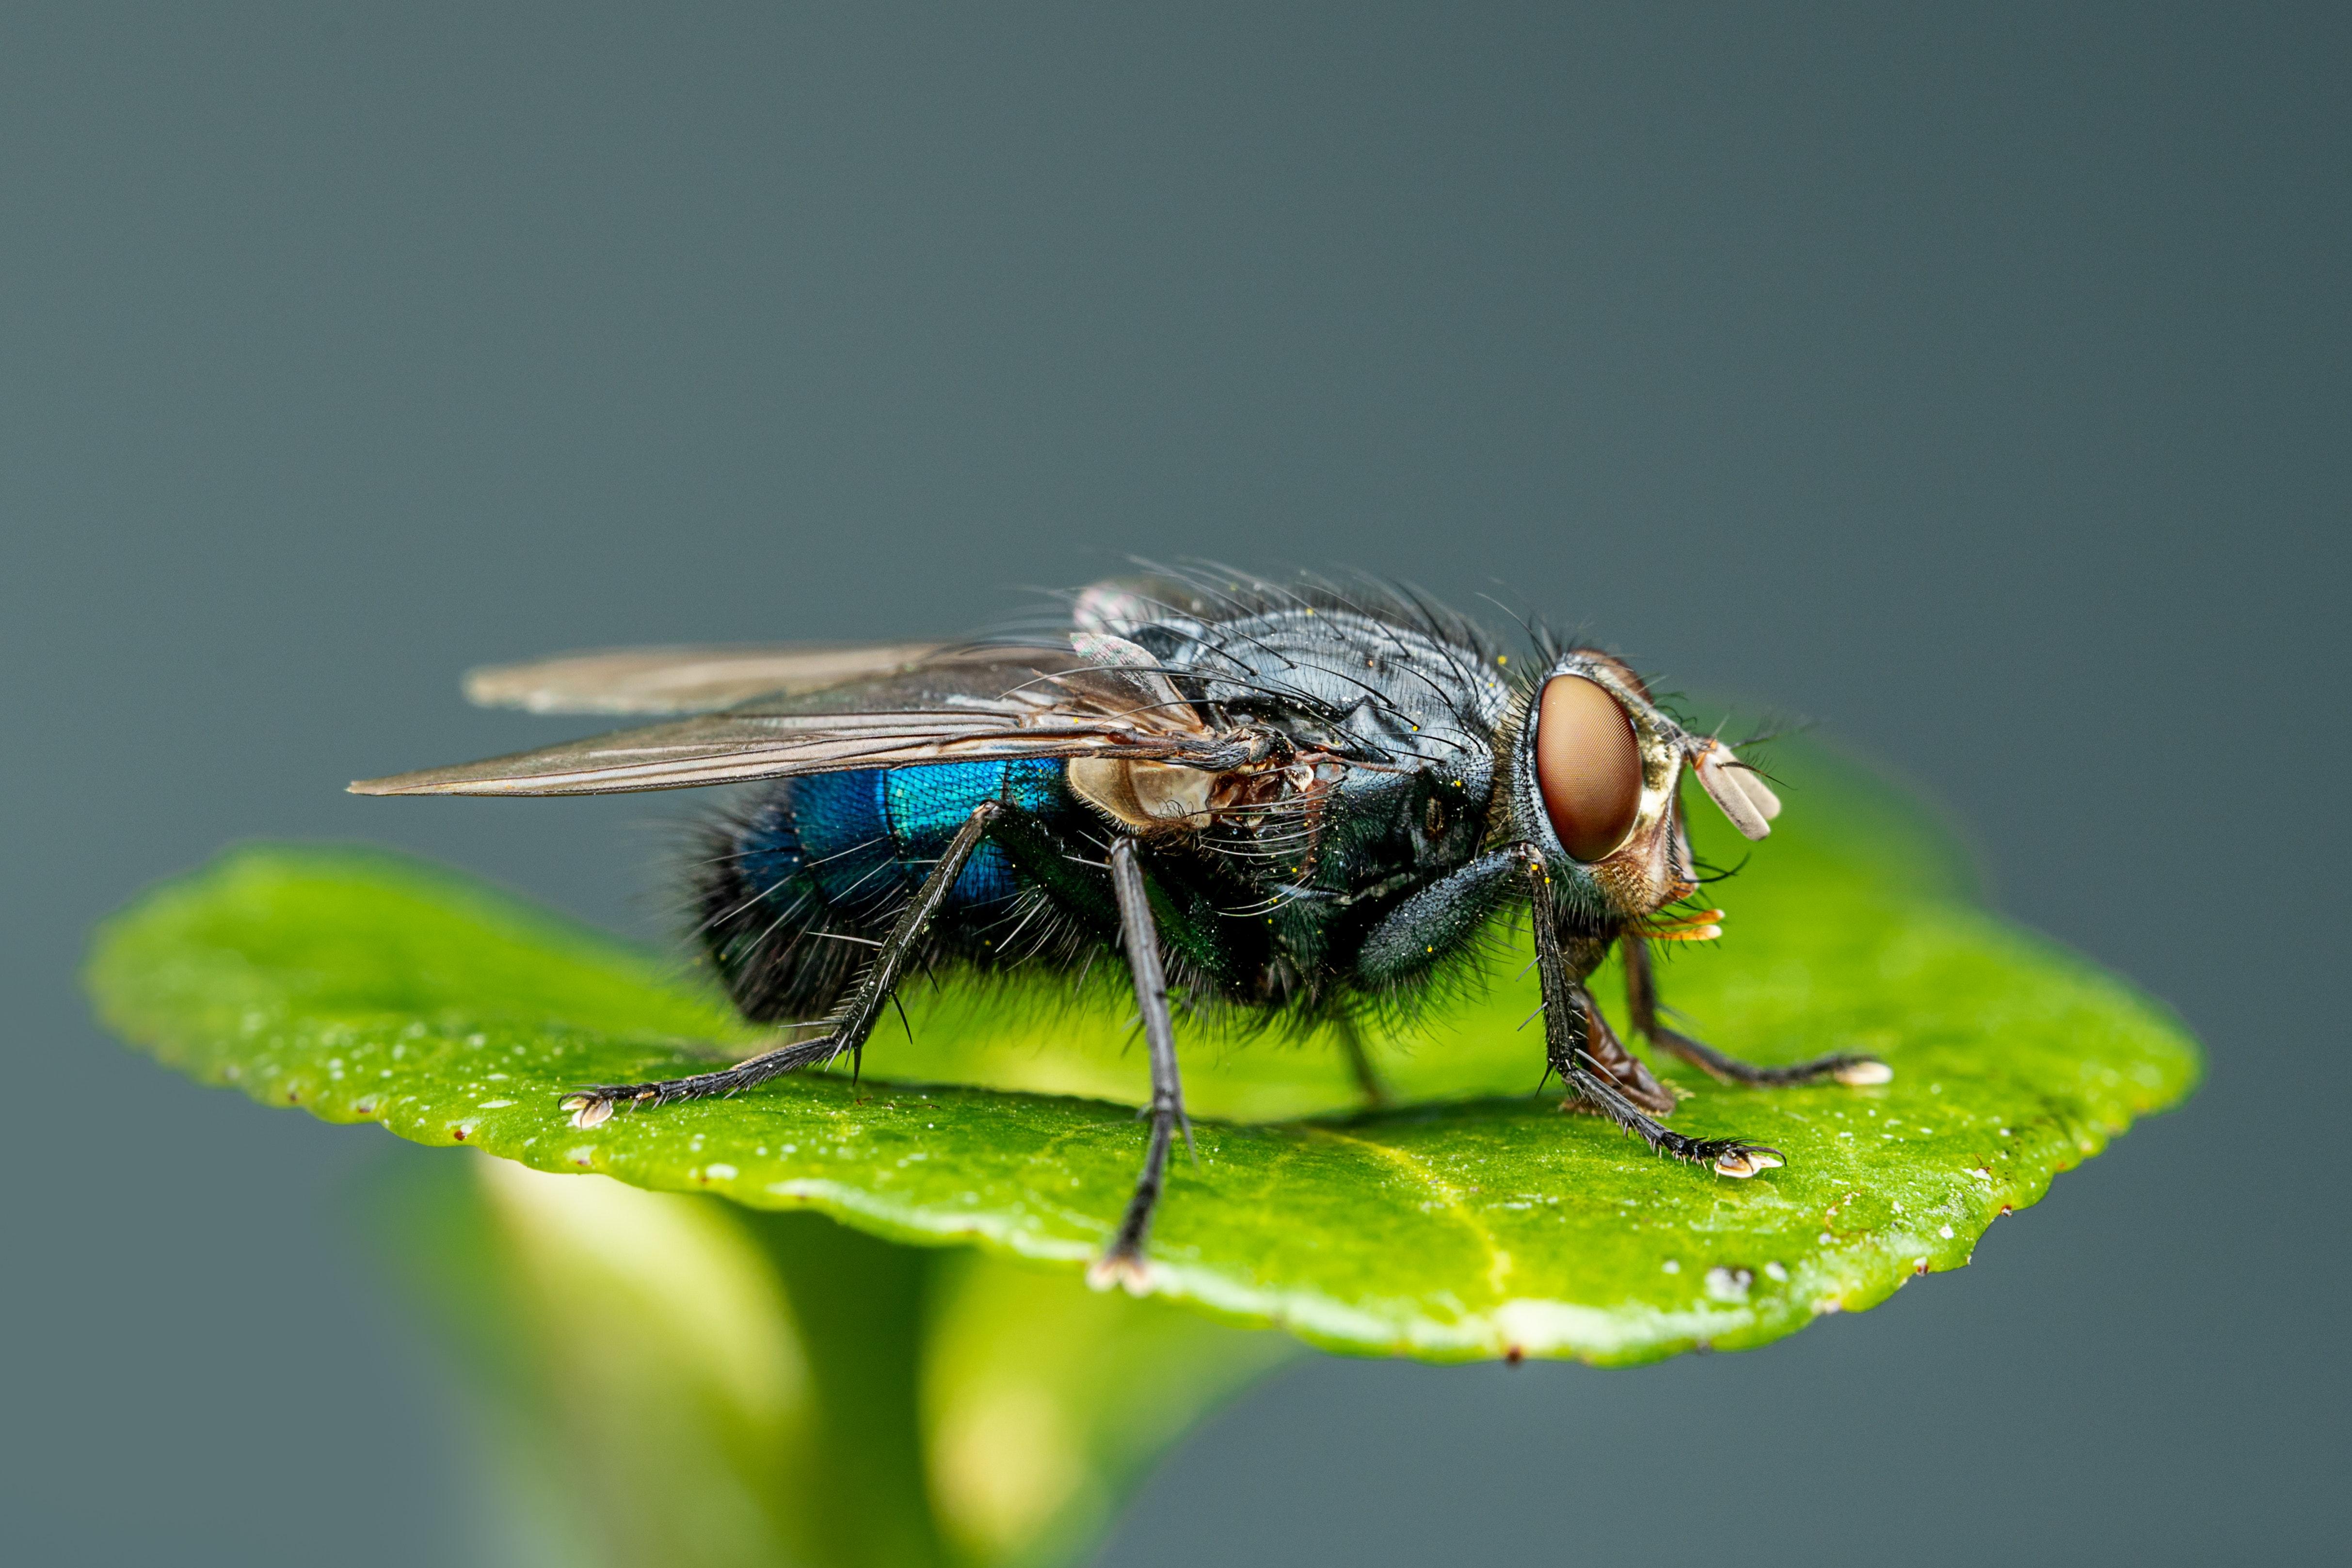 How many legs do house flies have? 